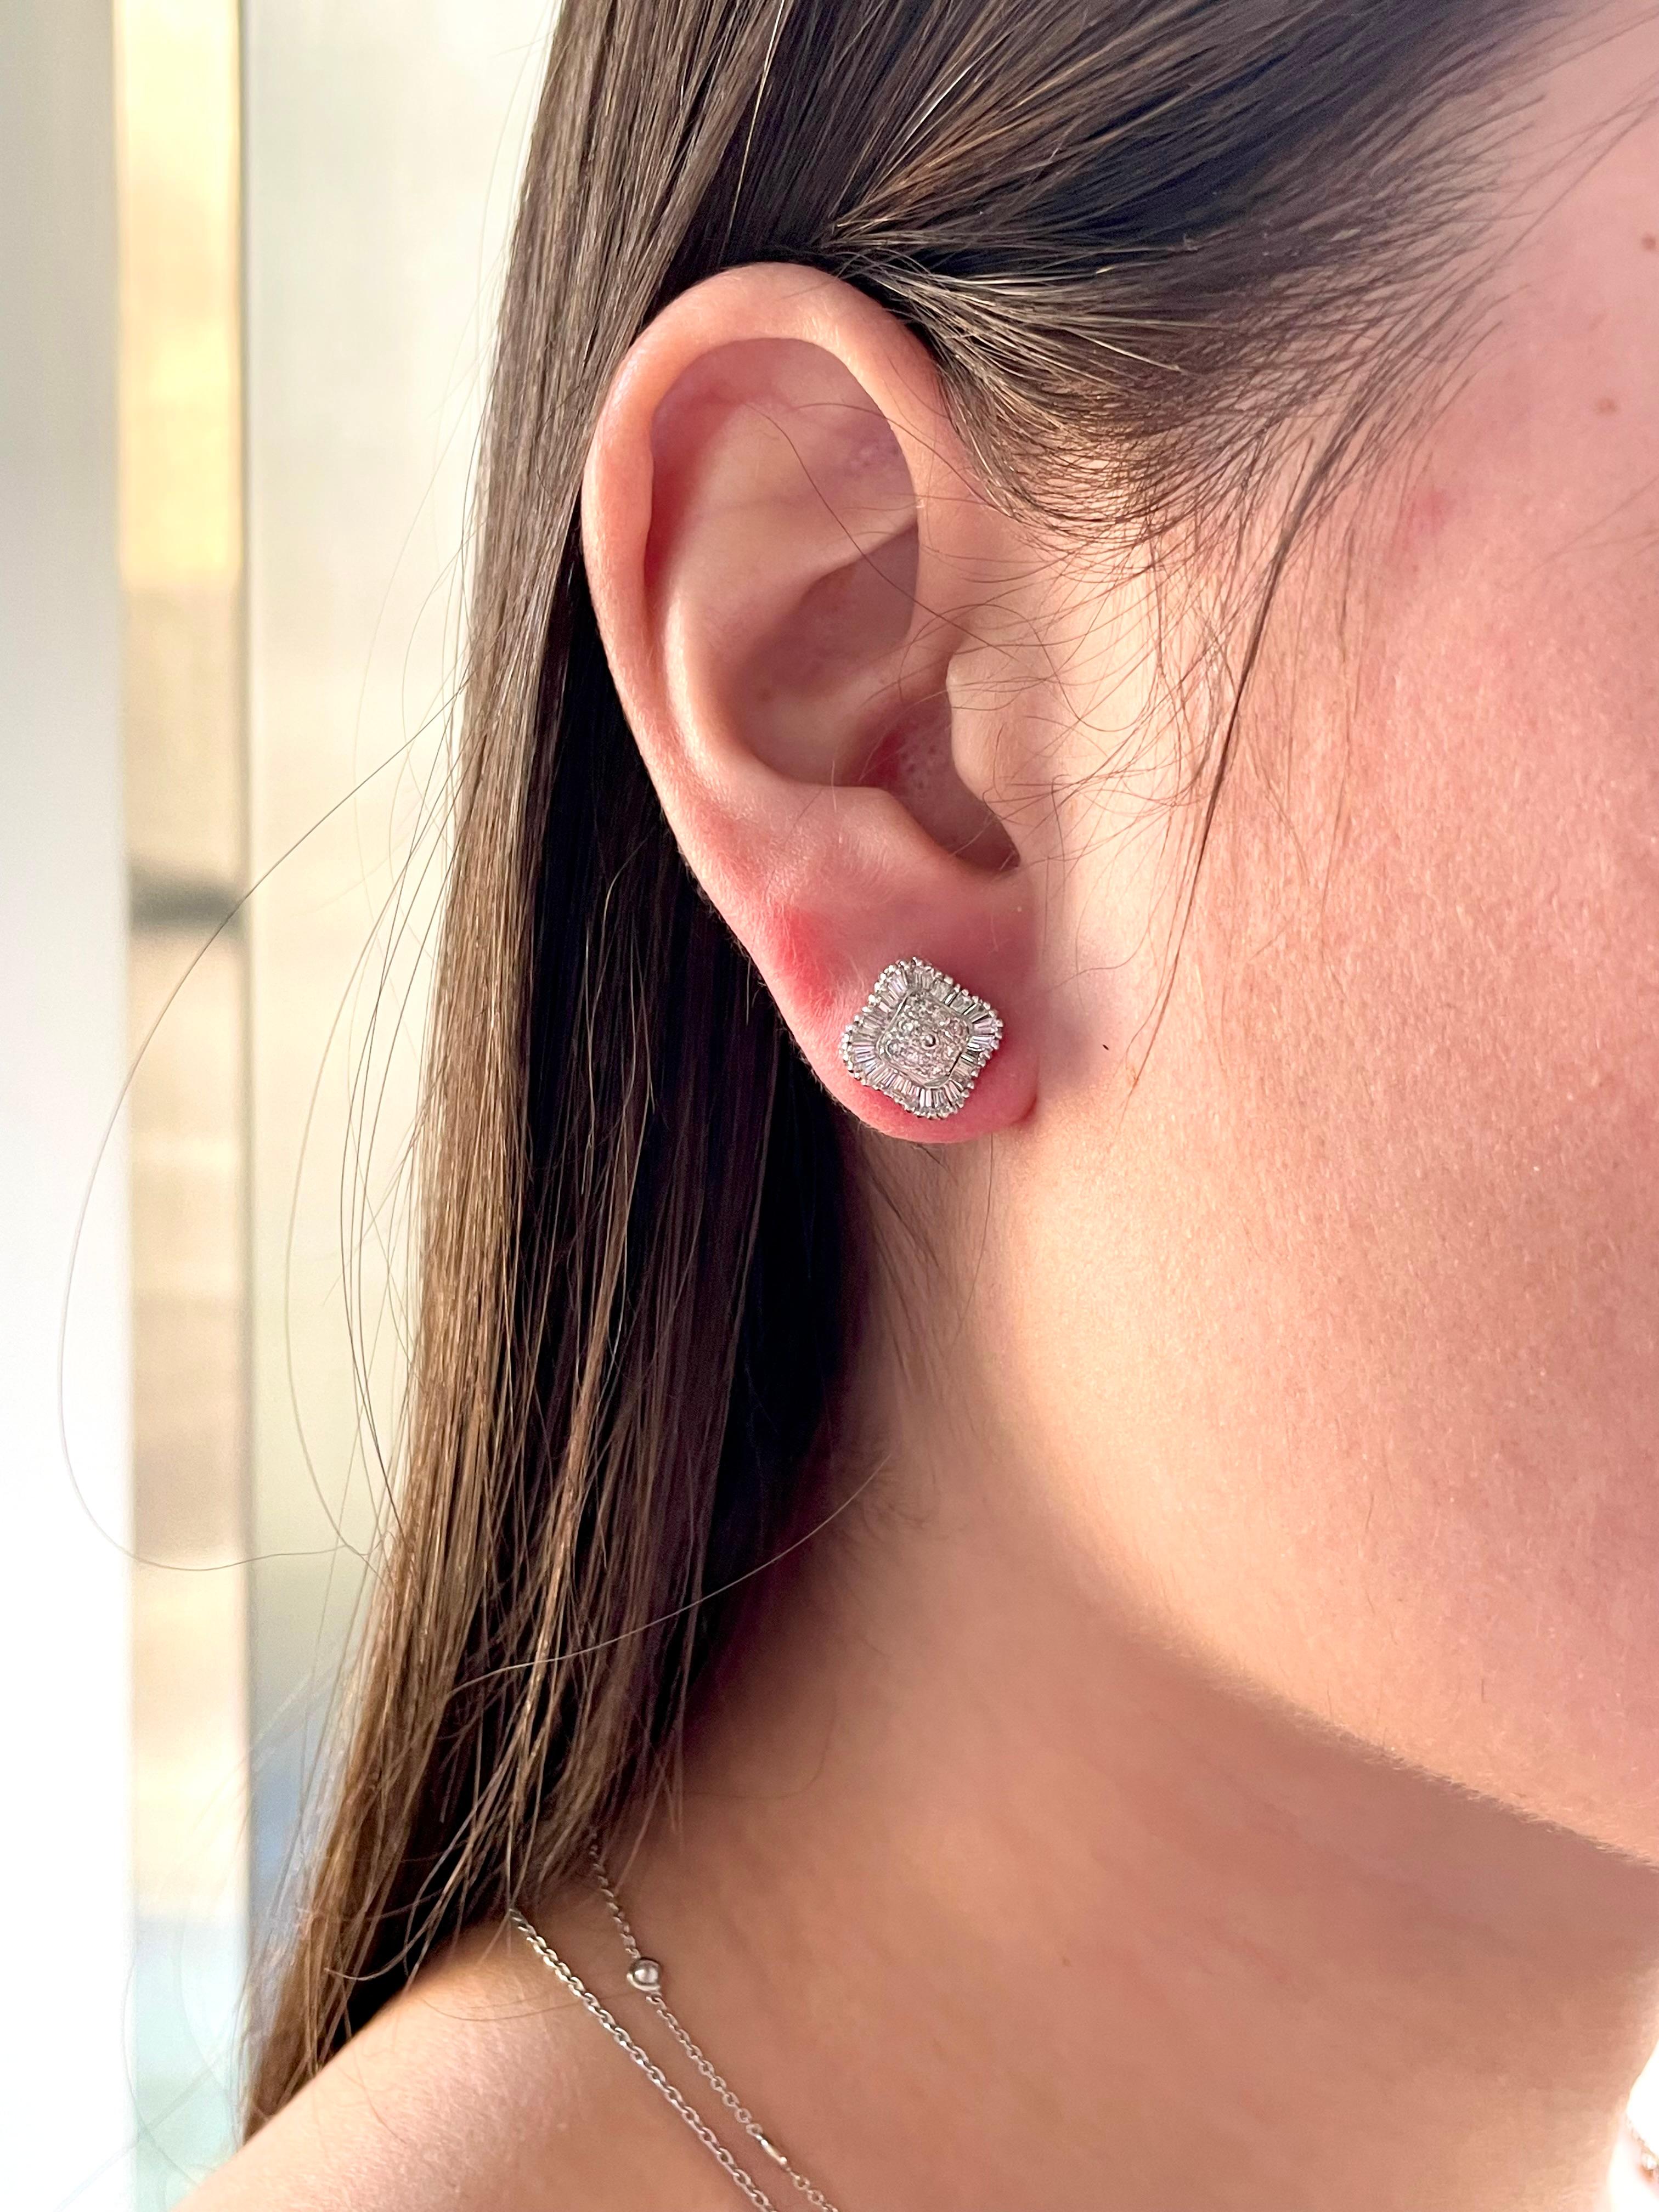 These earrings are a gorgeous celebration of sparkle, texture and classic design. J. Birnbach adds dimension and brilliance to the beloved clover shape by combining round and tapered baguette diamonds. Round pave diamonds fill the interior, and a